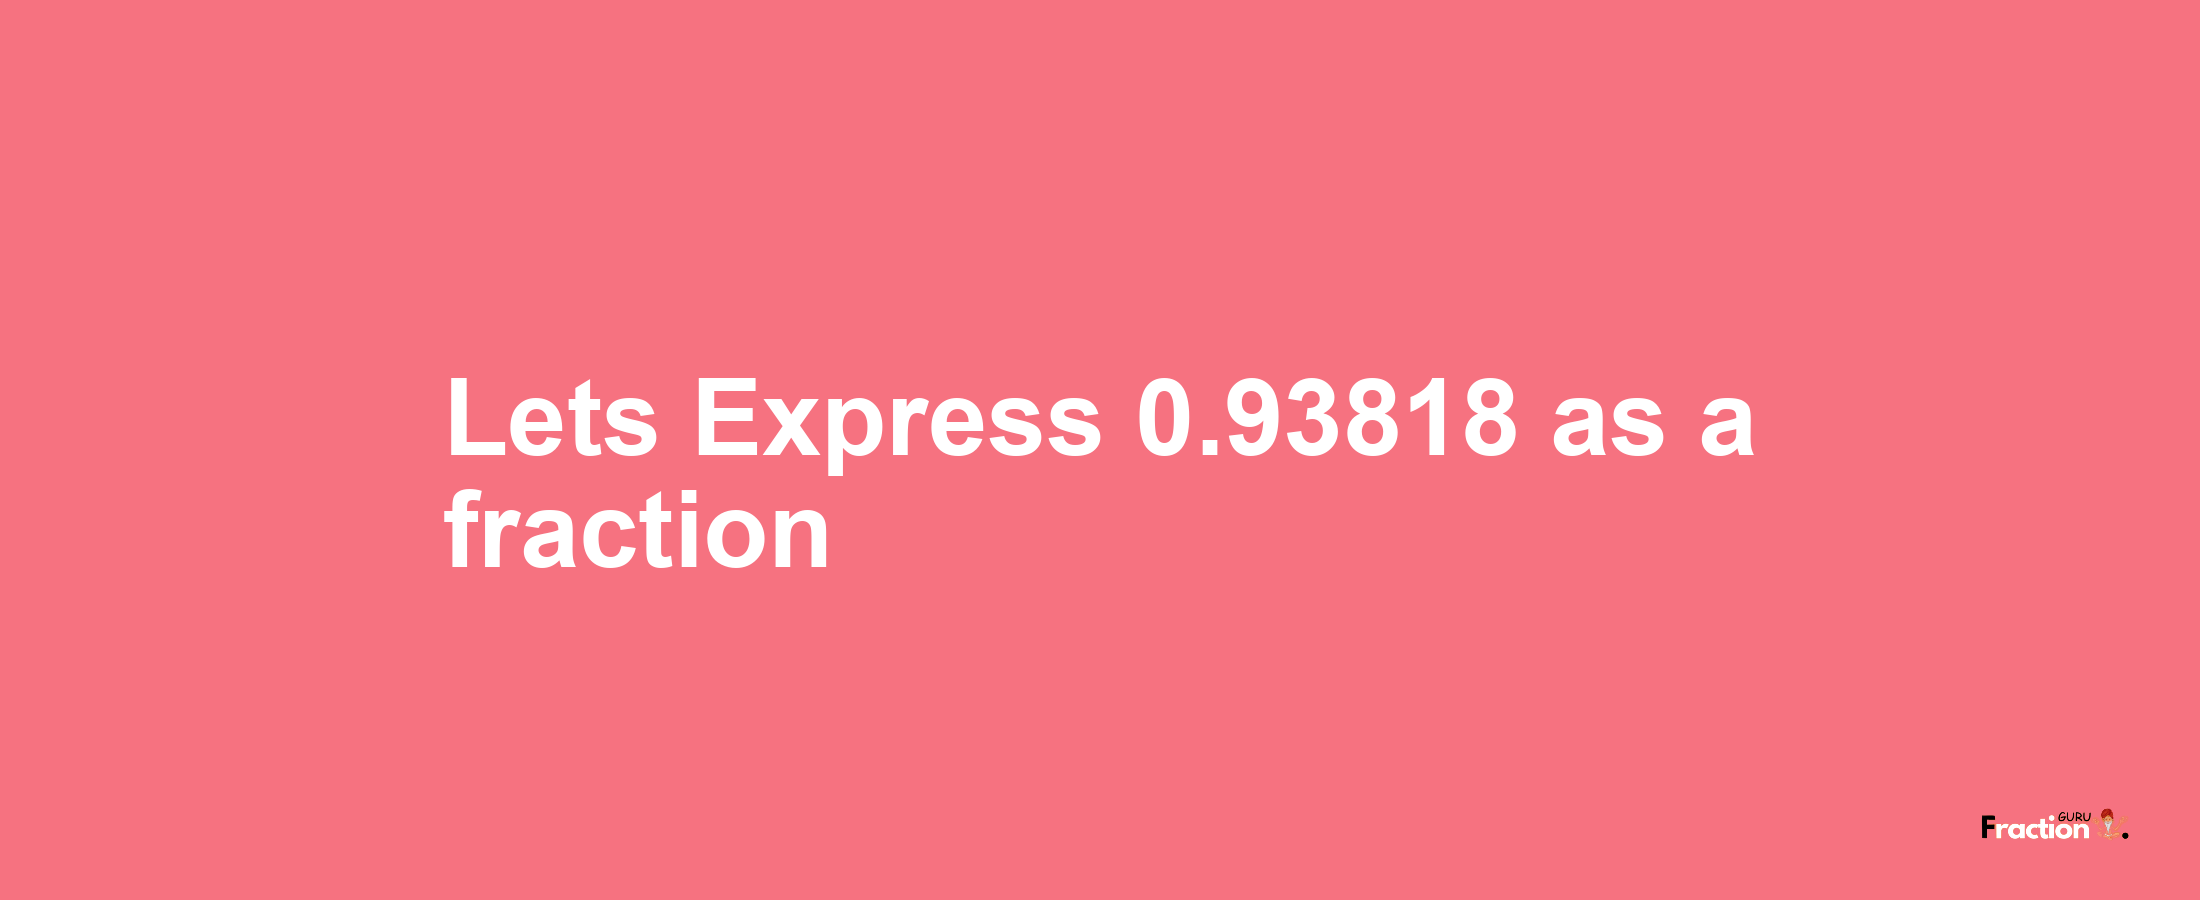 Lets Express 0.93818 as afraction